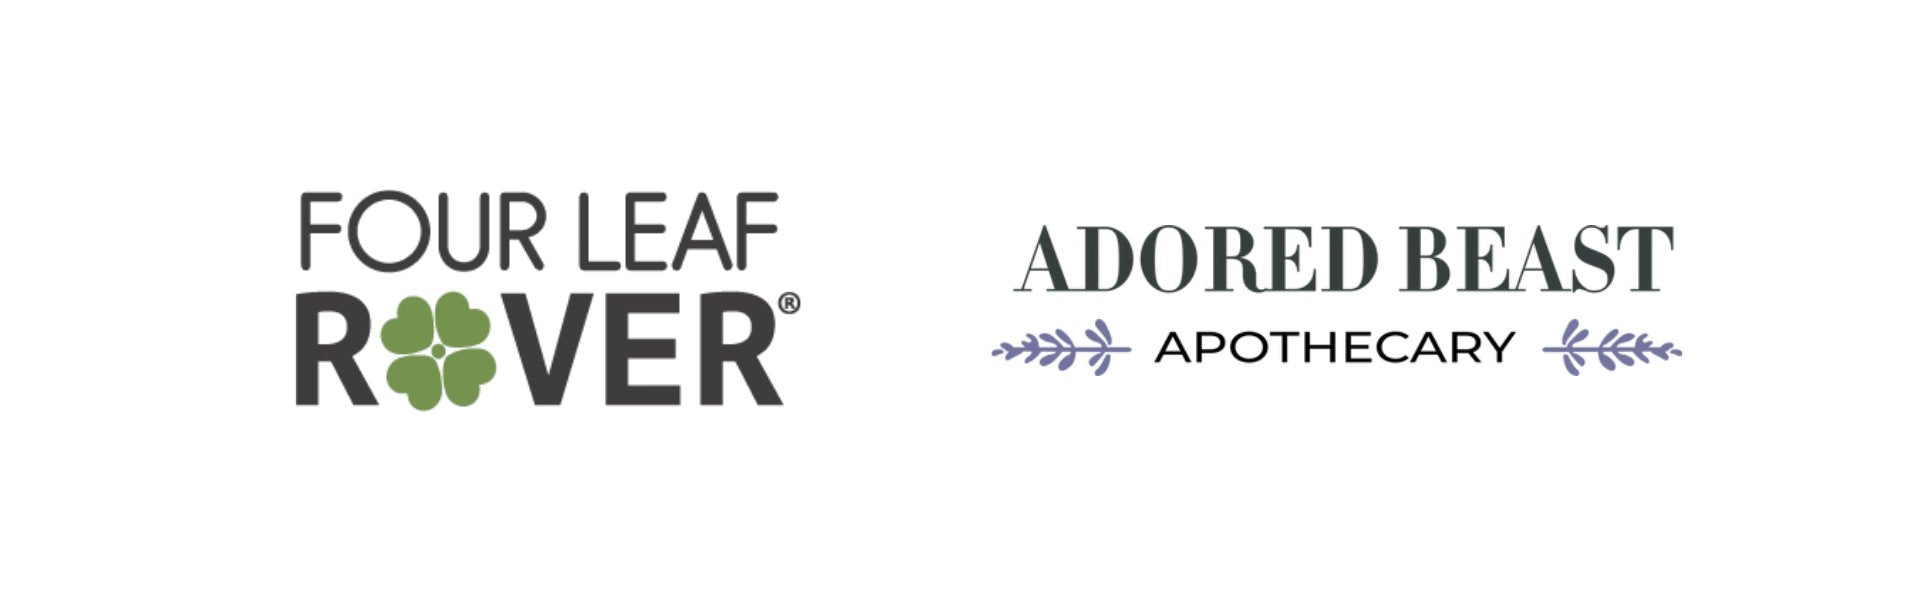 Two Logos: Four Leaf Rover & Adored Beast Apothecary